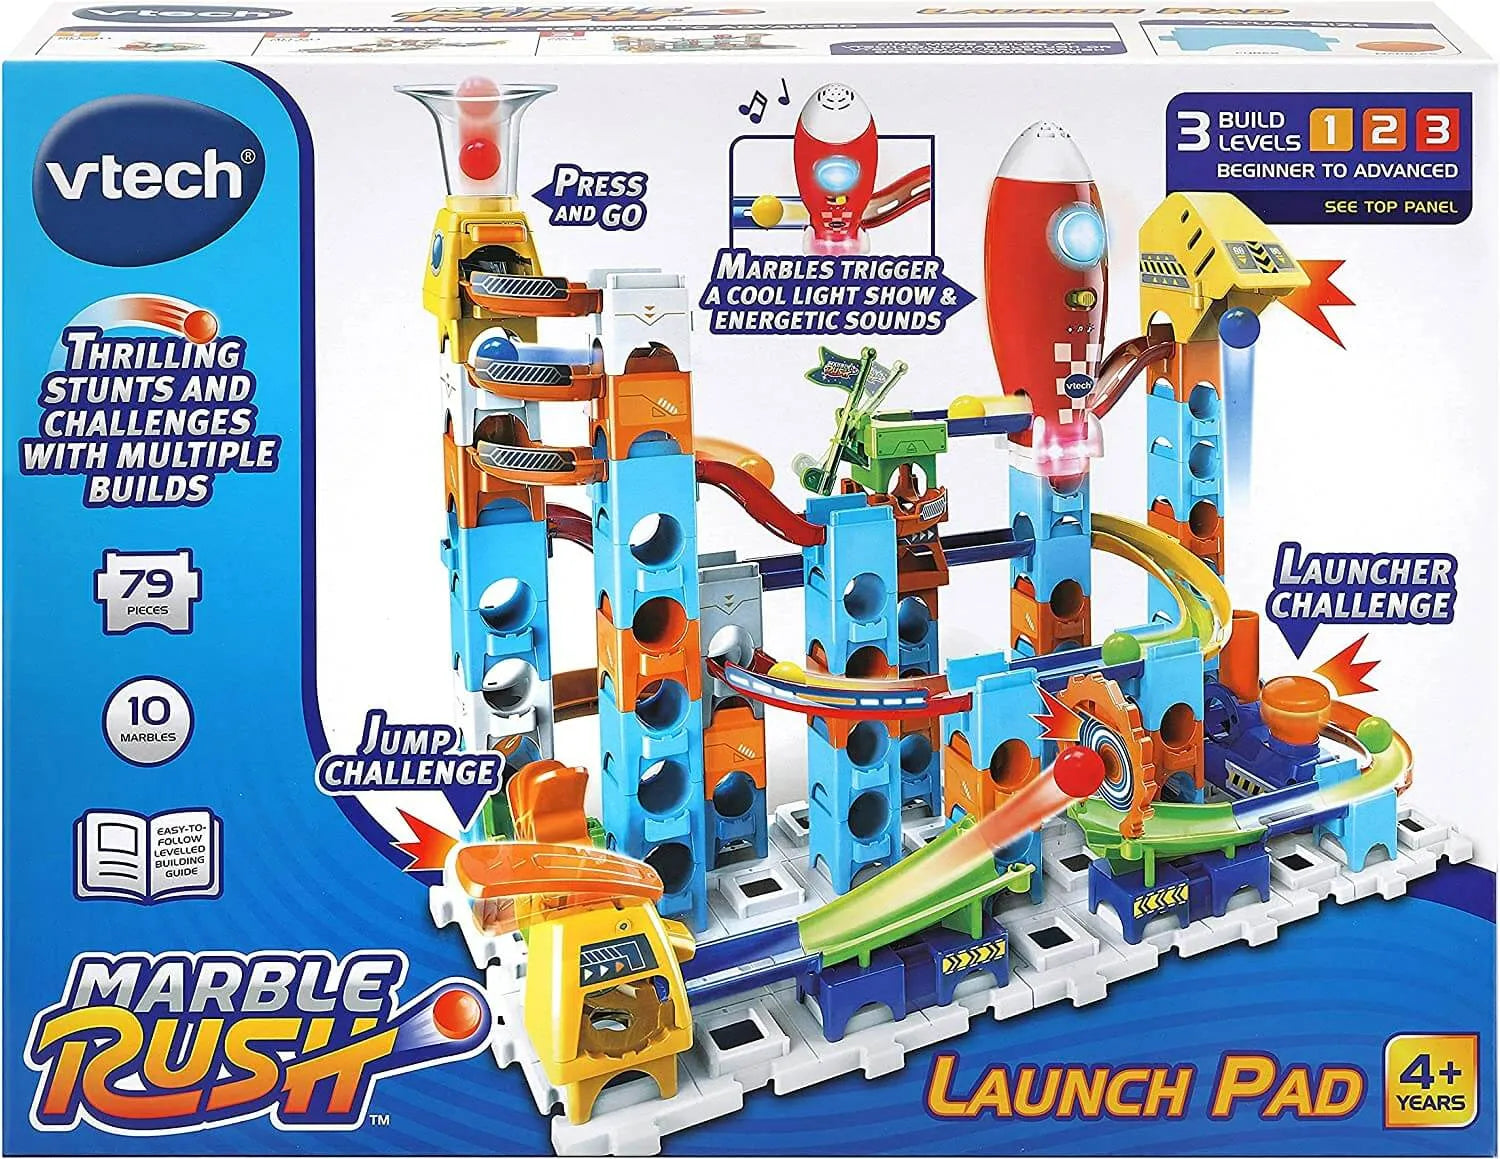 Electronic construction set for kids - Buy vtech marble rush launchpad set - Vtech marble rush instructions